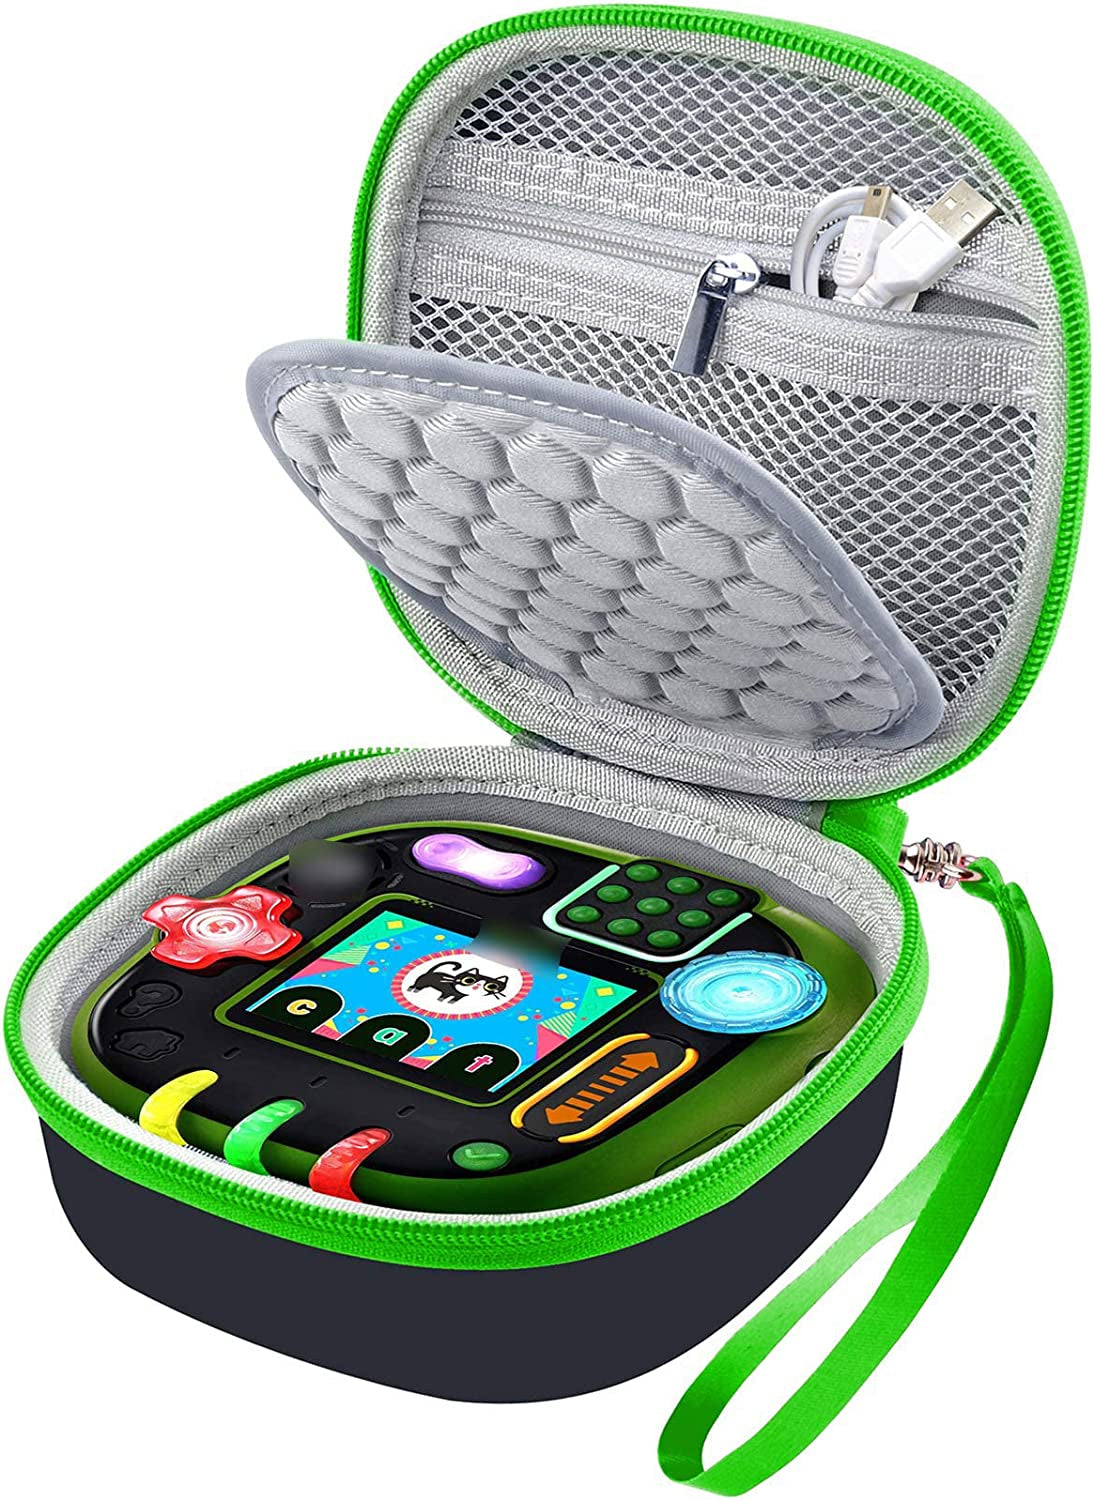 Comecase Case for Leapfrog Rockit Twist Handheld Learning Game System, Perfect Toy Box Storage for Kids Children -Purple